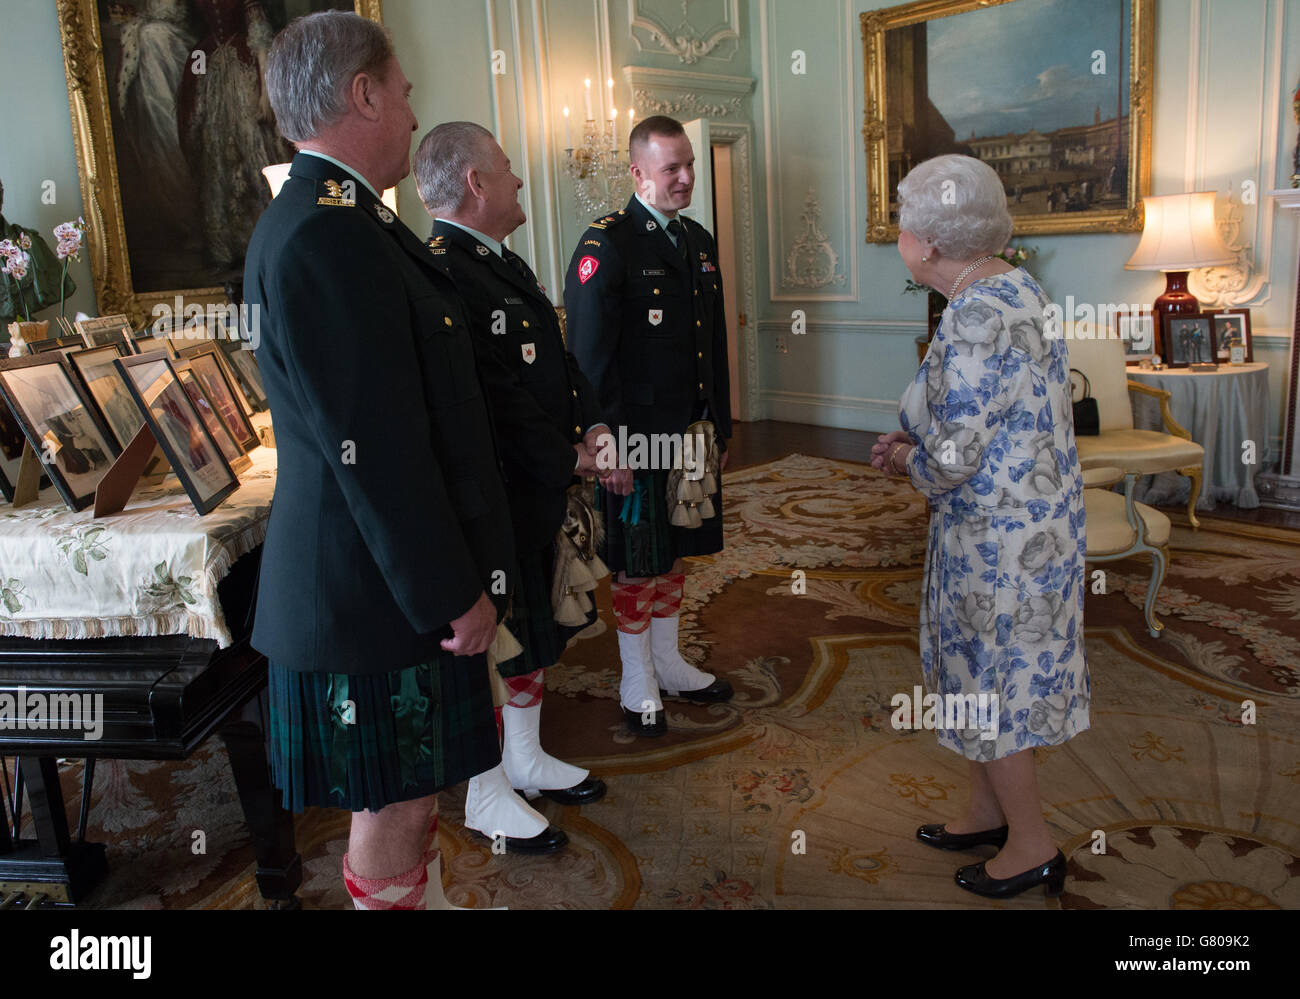 Queen Elizabeth II, in her capacity as Colonel-in-Chief of the Argyll and Sutherland Highlanders of Canada, receives (from left) Colonel Ronald Foxcroft (Honorary Colonel), Lieutenant Richard Kennedy (Honorary Lieutenant Colonel) and Lieutenant Colonel Lawrence Hatfield (Commanding Officer) at Buckingham Palace in London. Stock Photo